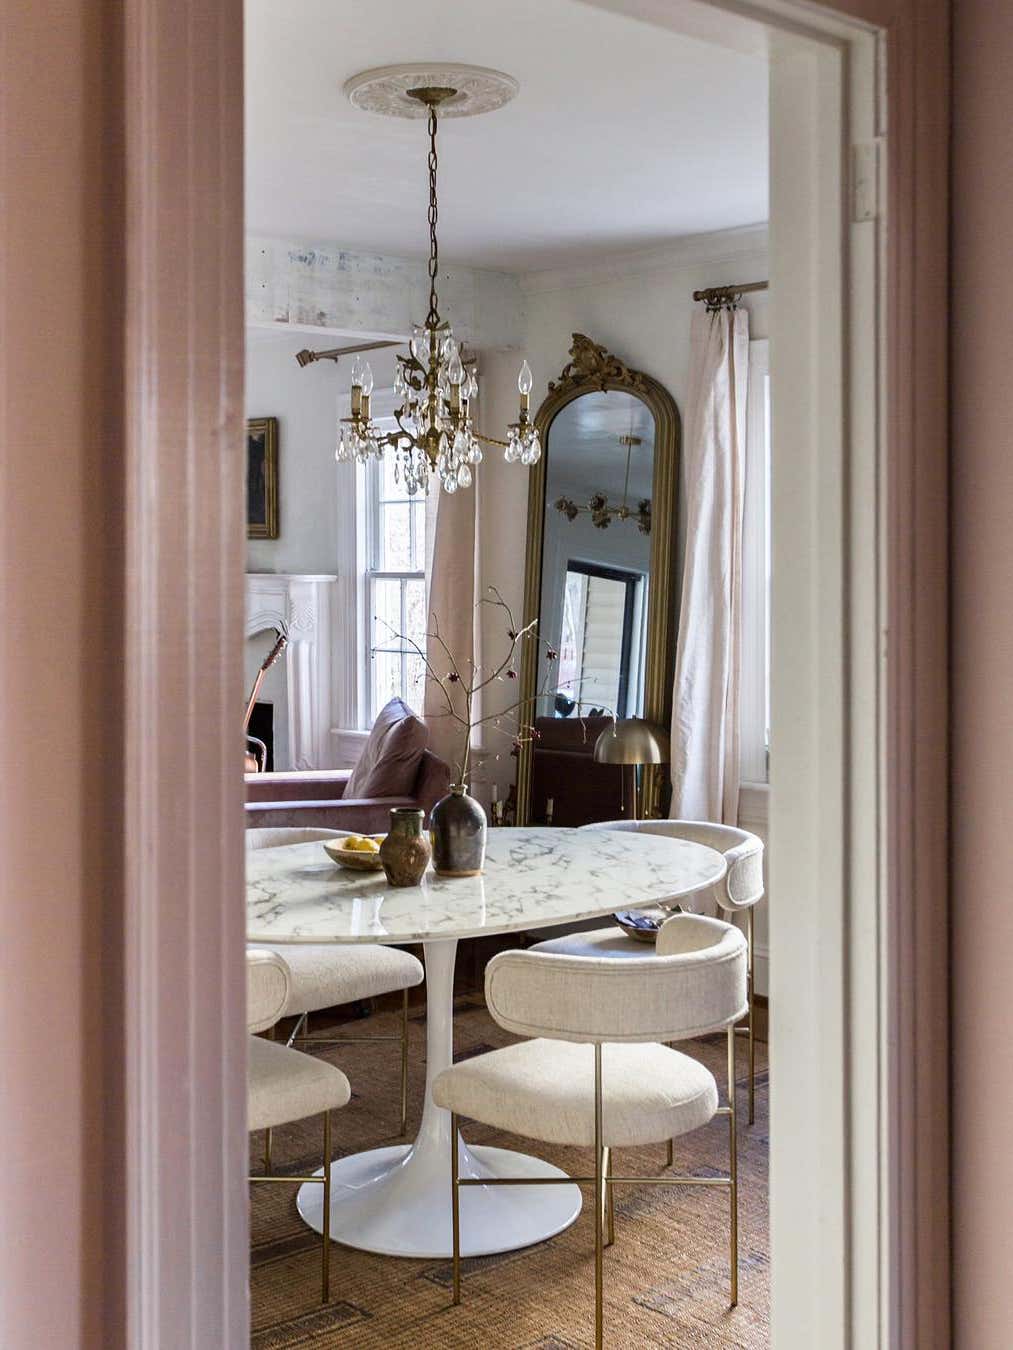 The Glam Chair We’ve Noticed in Every Ultra-Chic Dining Room